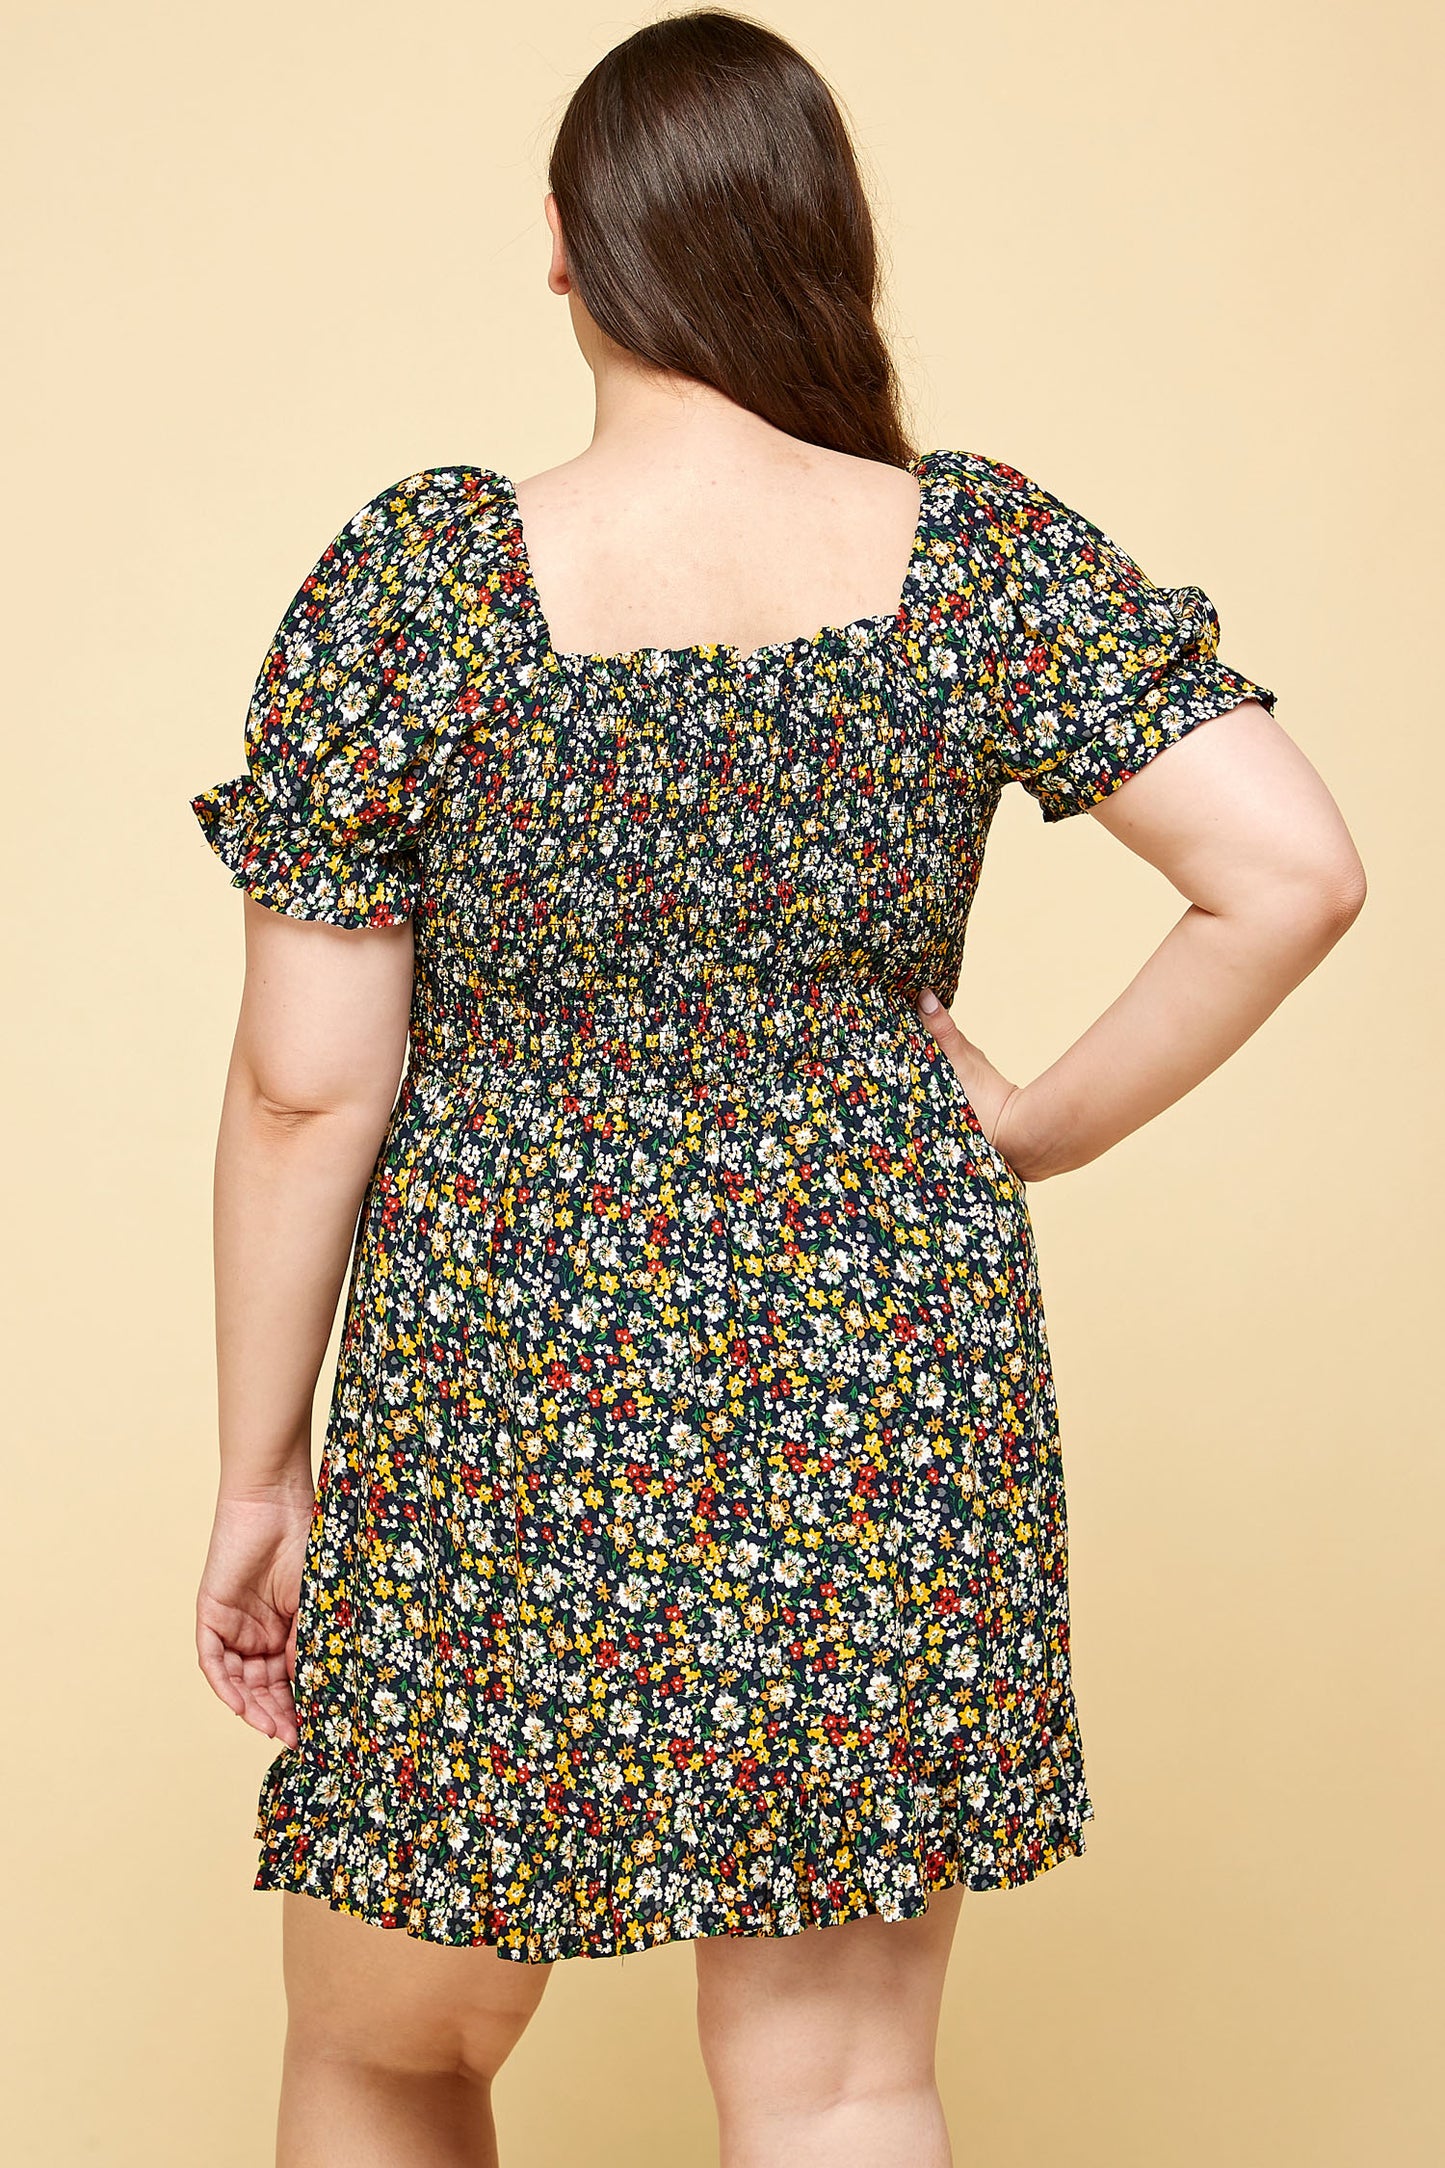 PLUS SIZE FLORAL BABYDOLL DRESS WITH MULTI COLORED FLOWERS